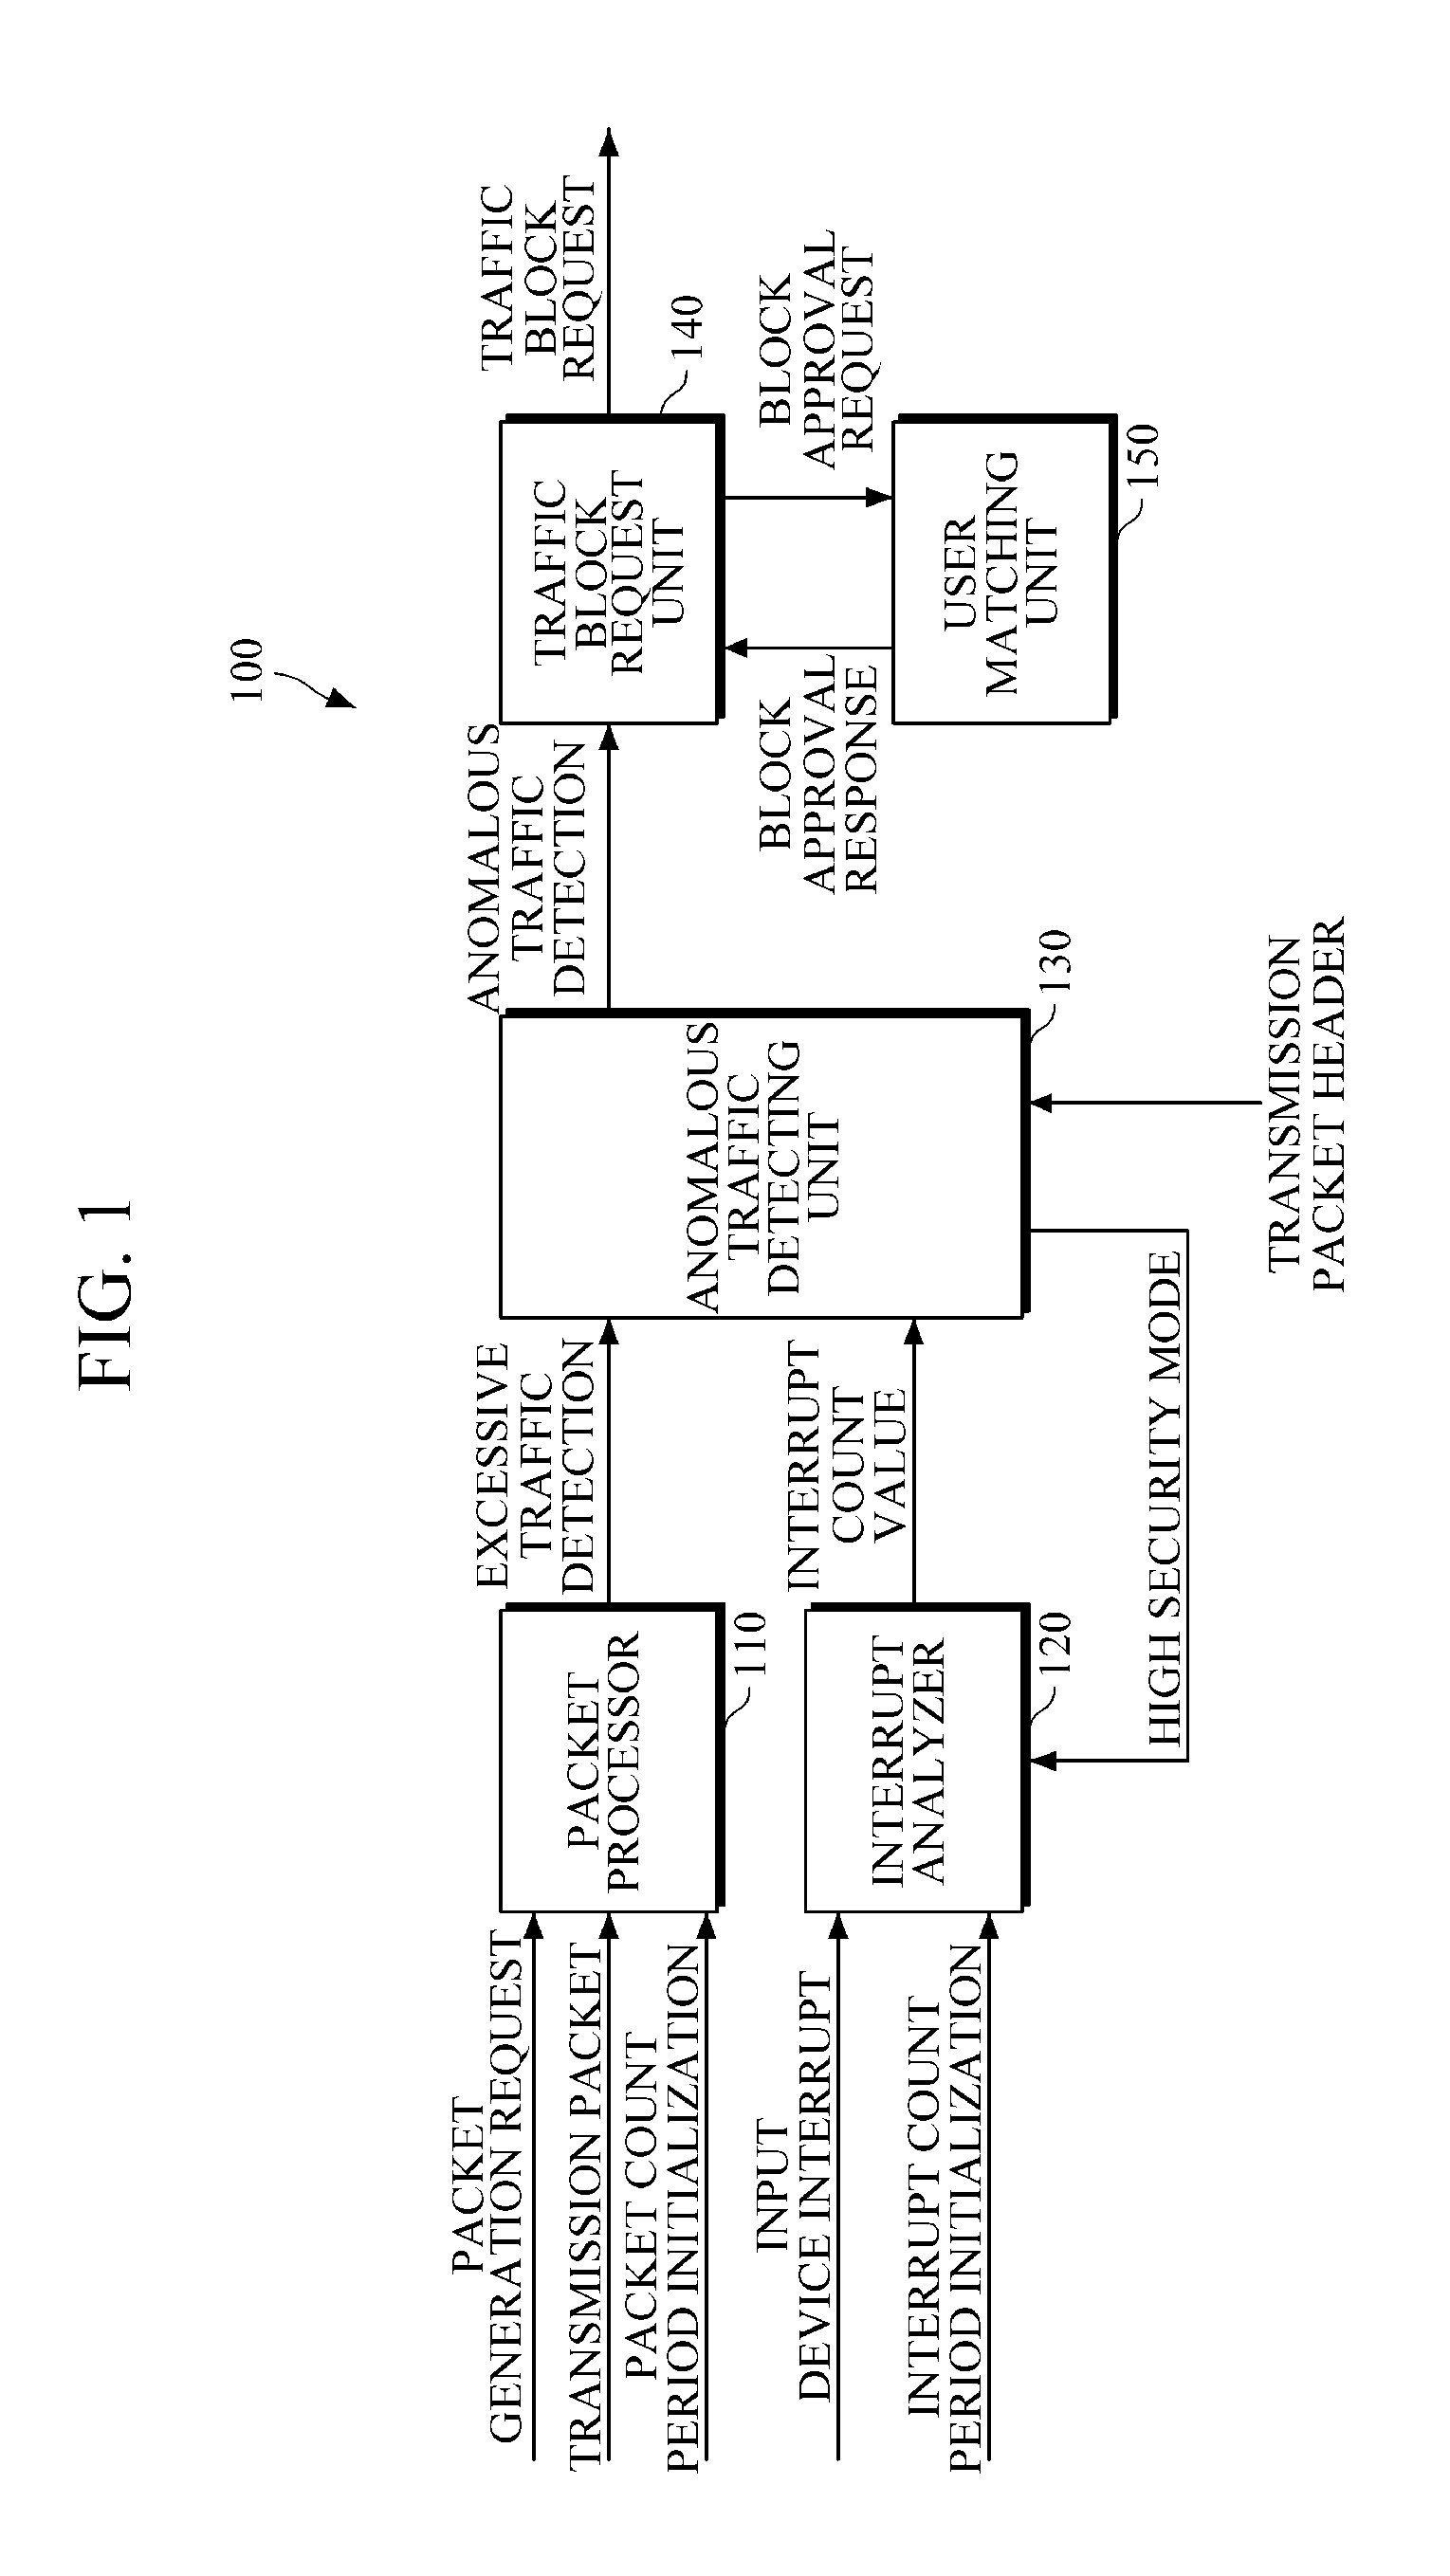 Apparatus and method for cyber-attack prevention